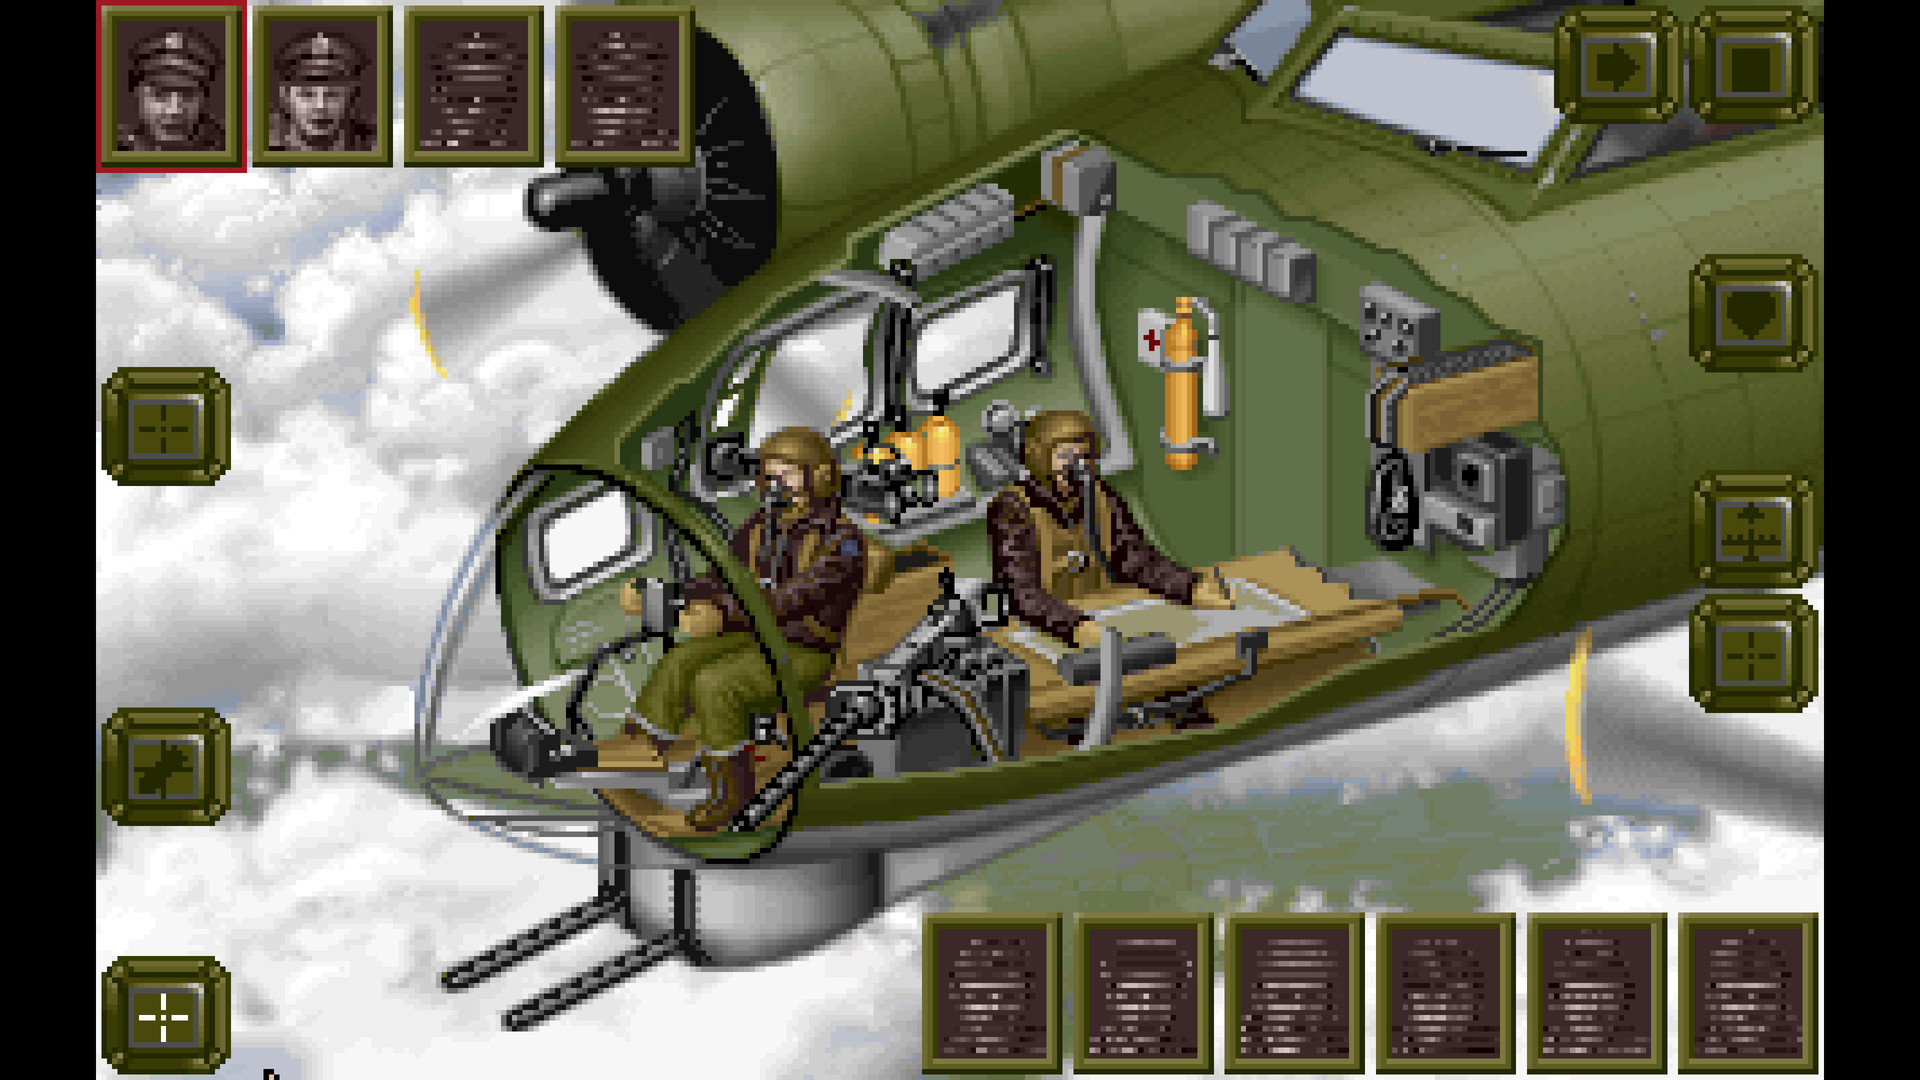 B-17 Flying Fortress: World War II Bombers in Action sur Steam